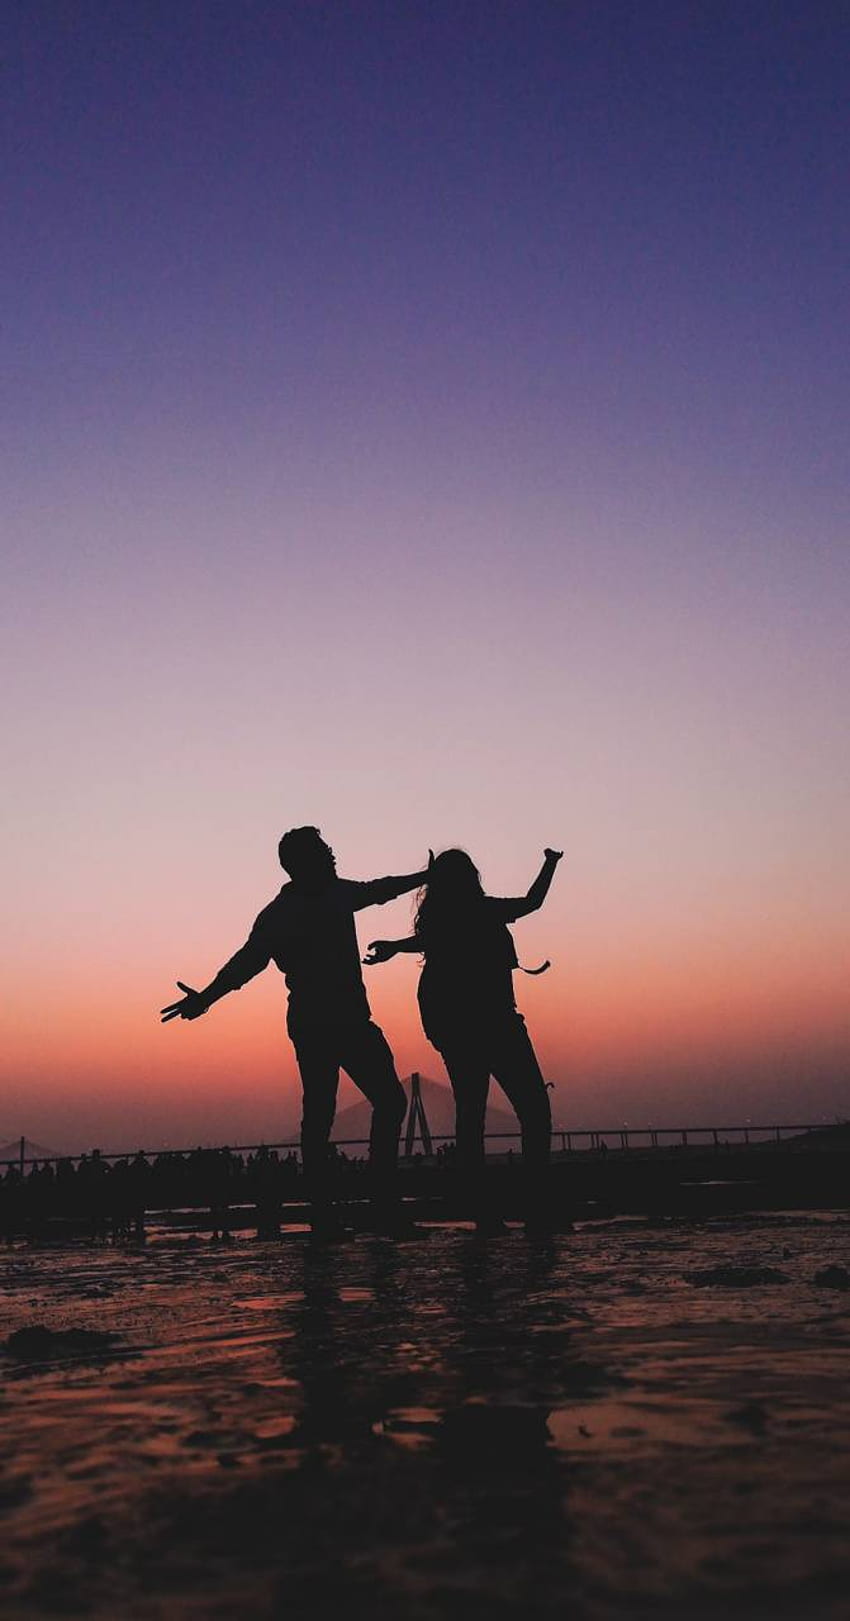 1179x2556px 1080p Free Download Couple Goals Iphone Couple Goal Cute Love Aesthetic 